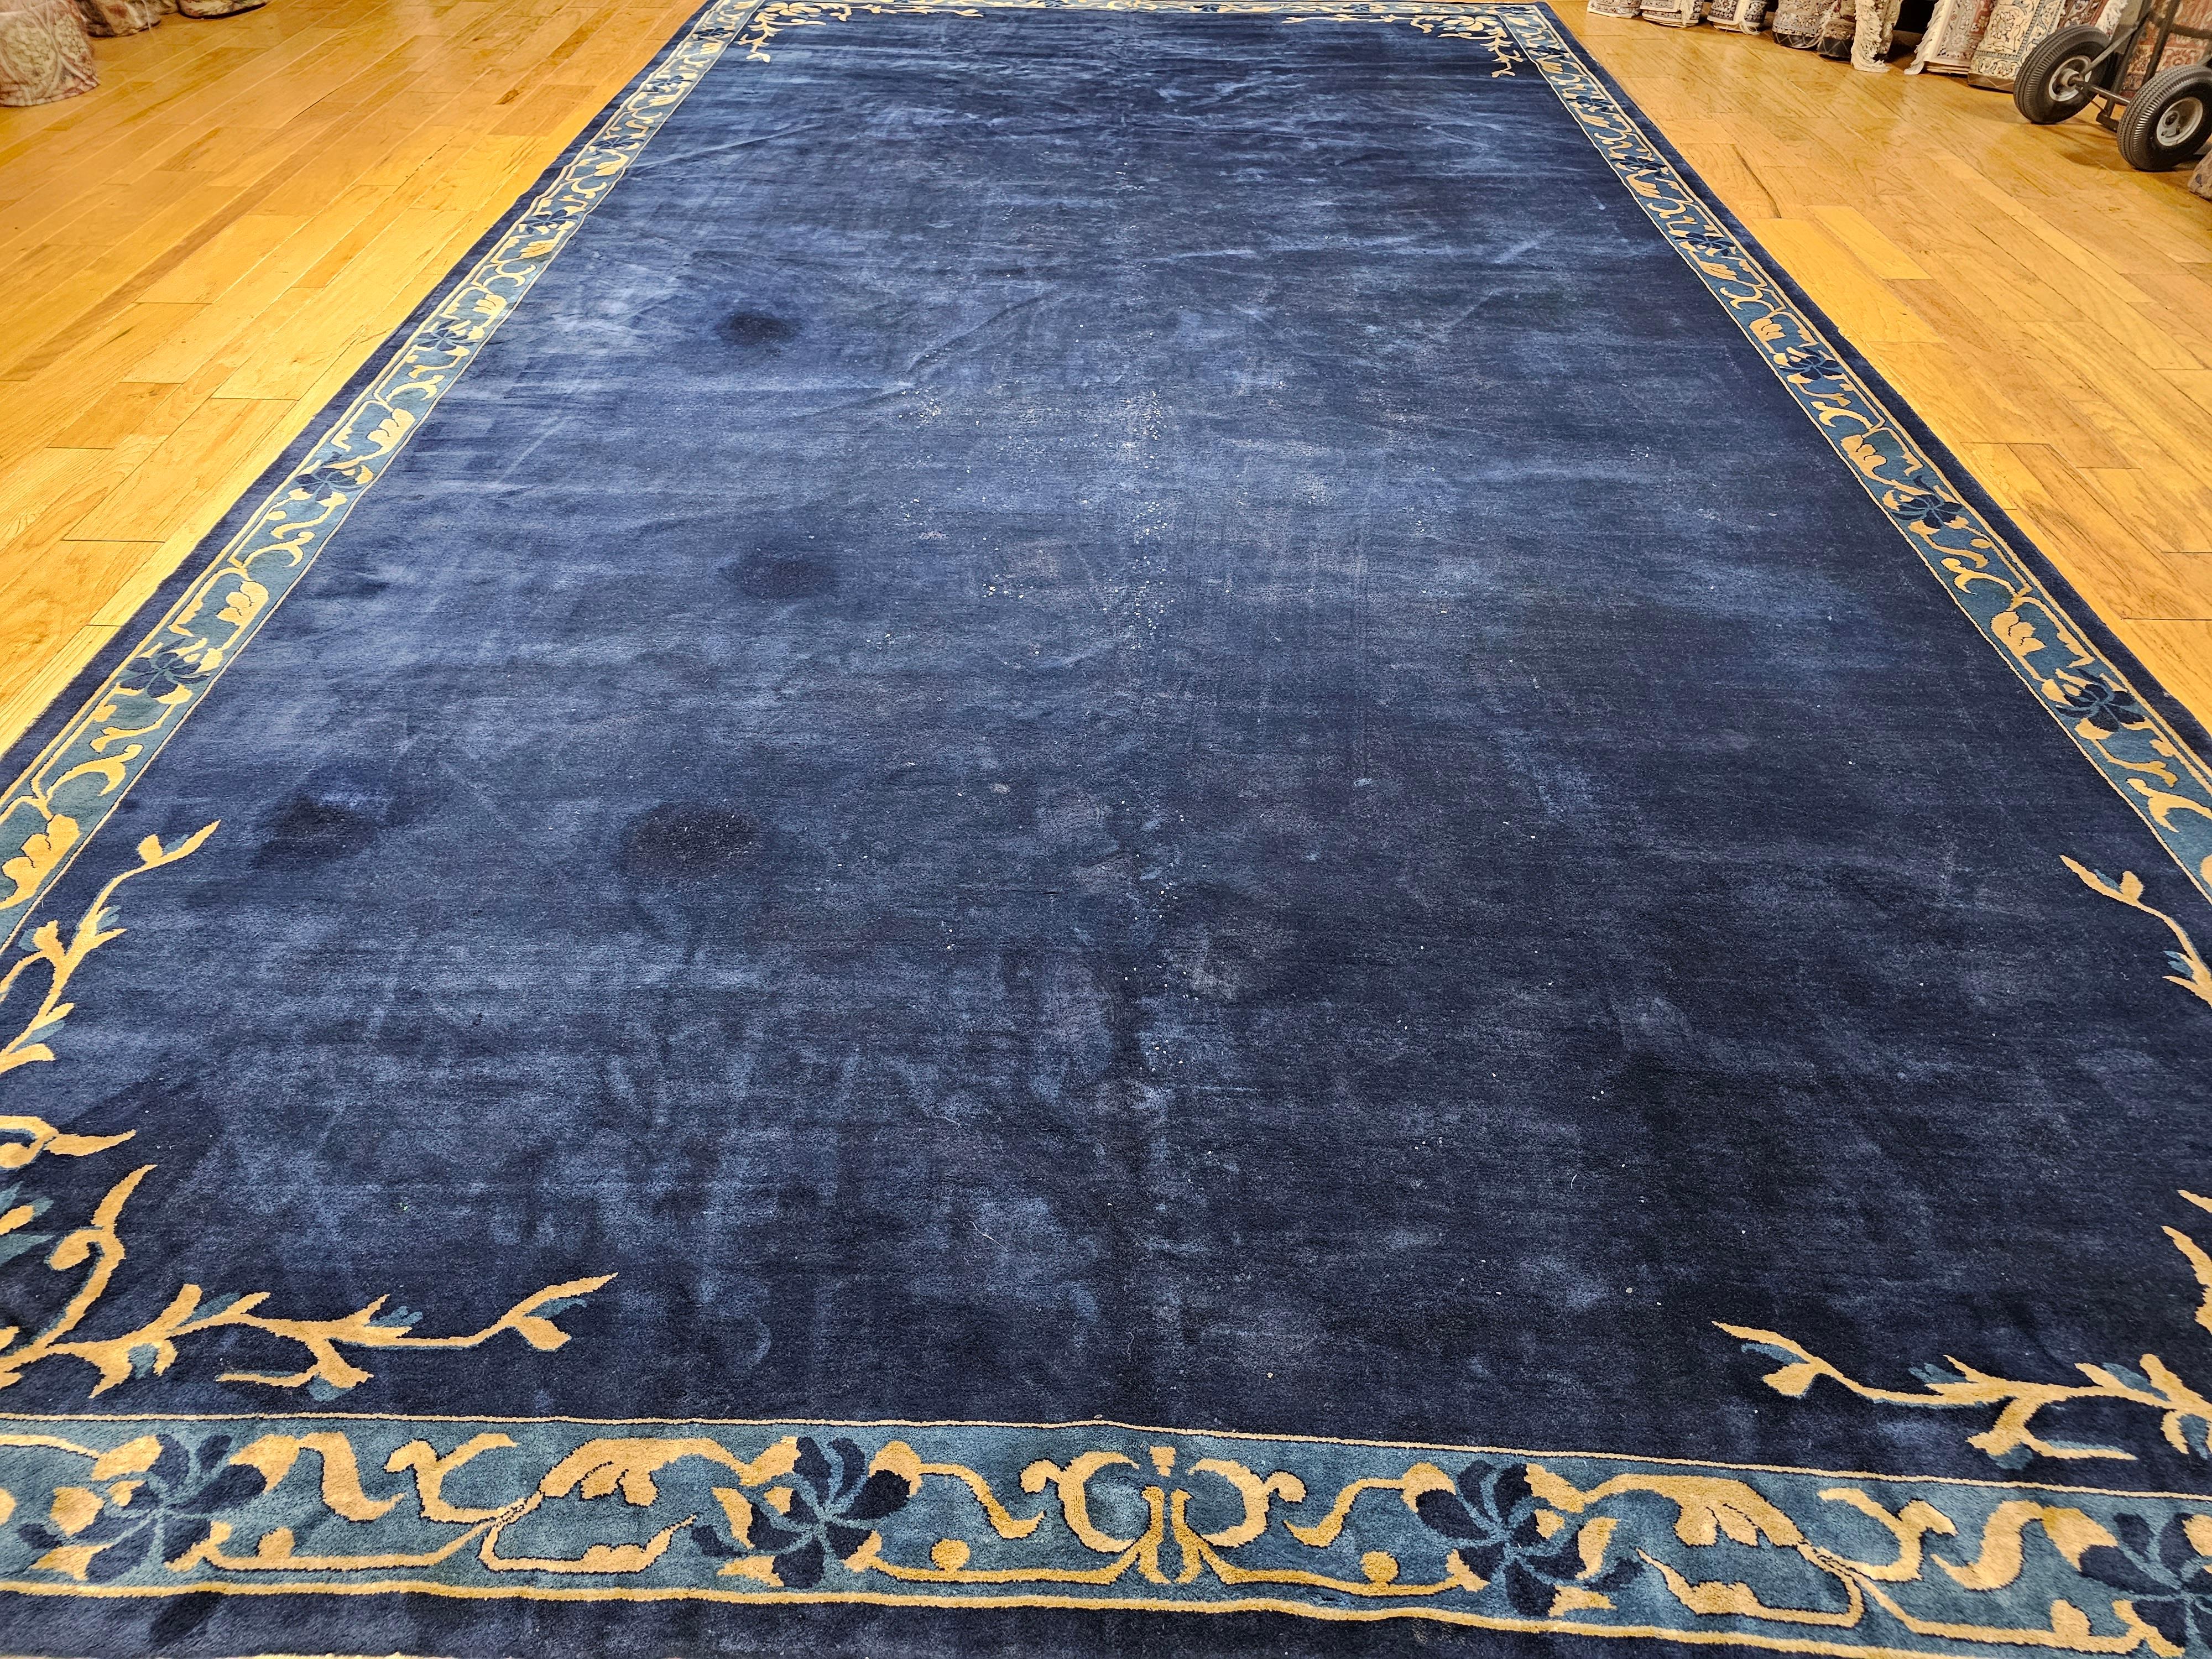 Oversize Art Deco Chinese Rug in Open Field Design in Navy, Gold, Baby Blue In Good Condition For Sale In Barrington, IL